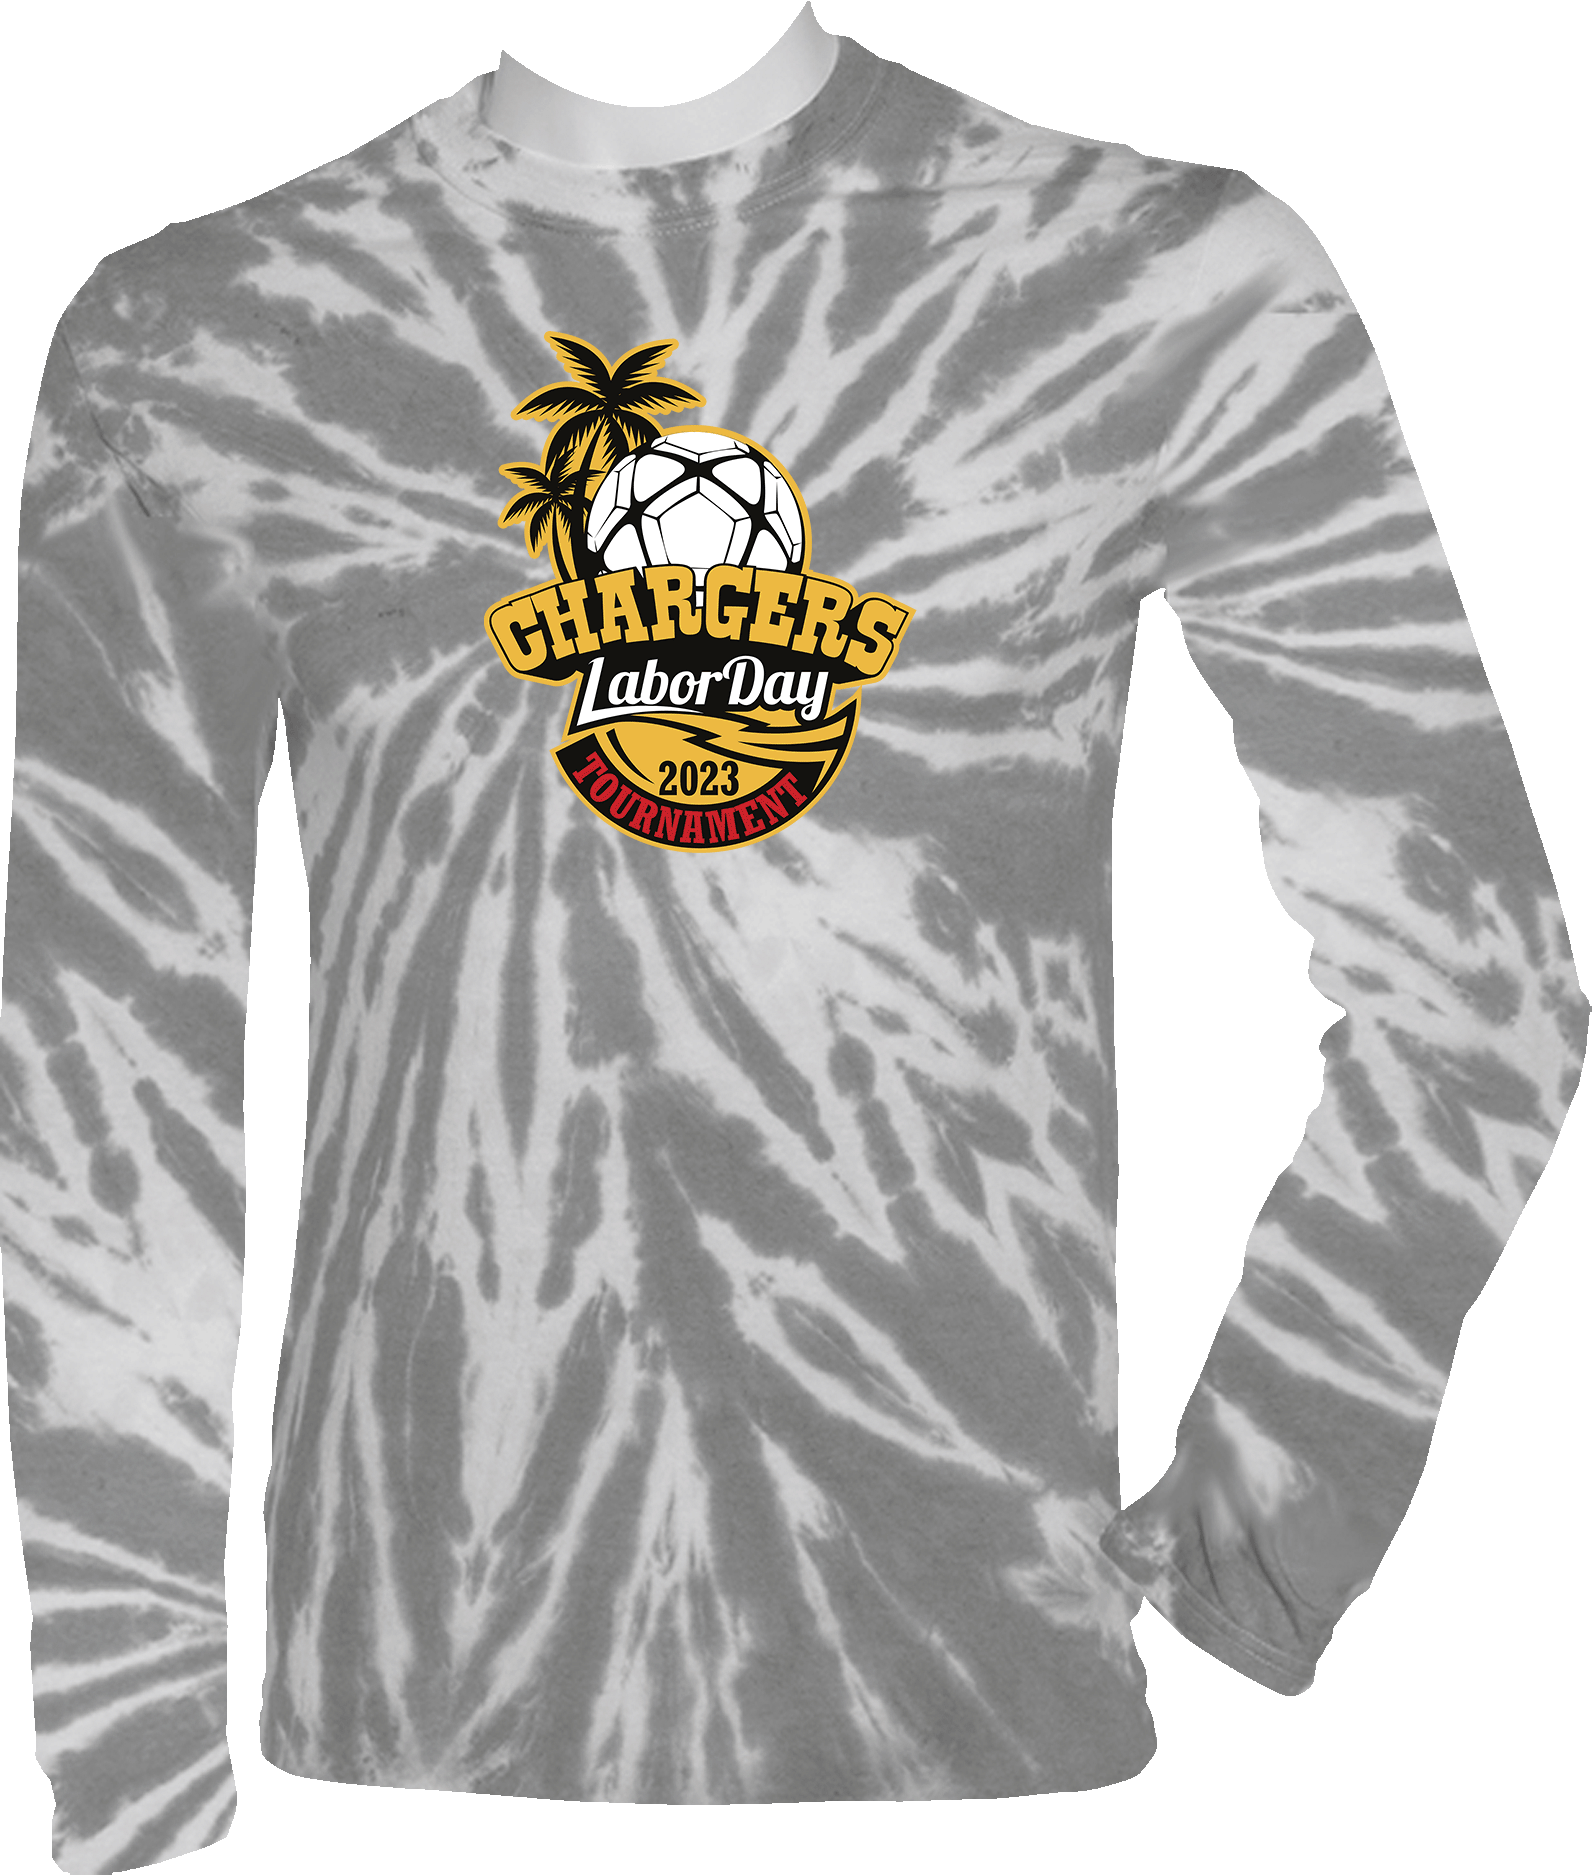 Tie-Dye Long Sleeves - 2023 Chargers Labor Day Tournament